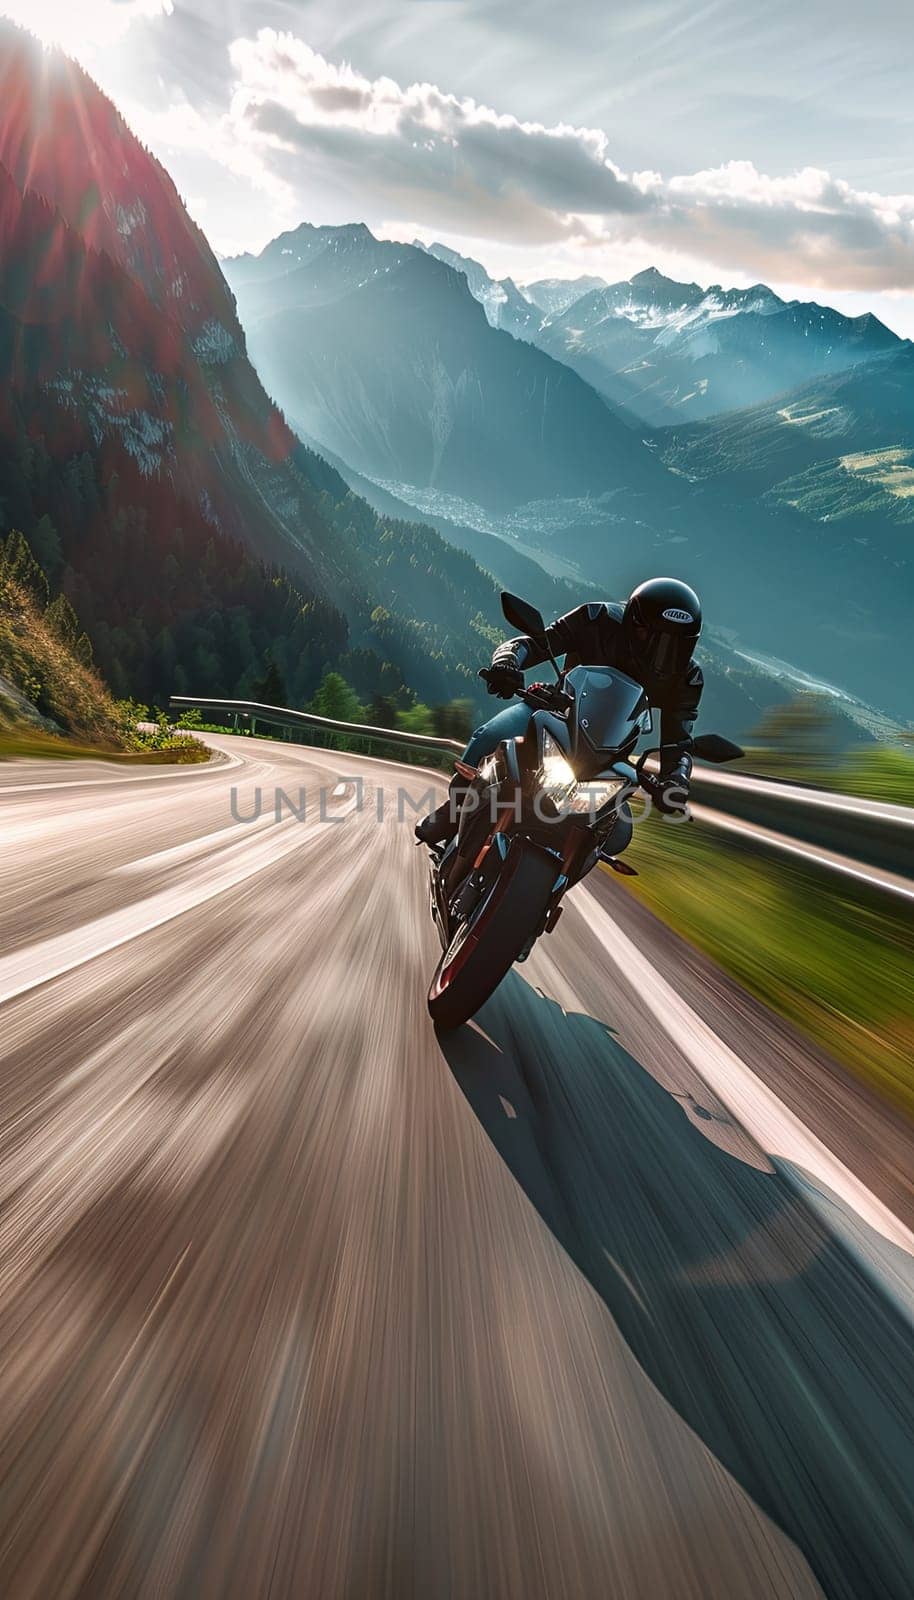 A man speeds on a motorcycle along a winding mountain road. The scenic background of mountains and forests is blurred, emphasizing the motorcycles speed.